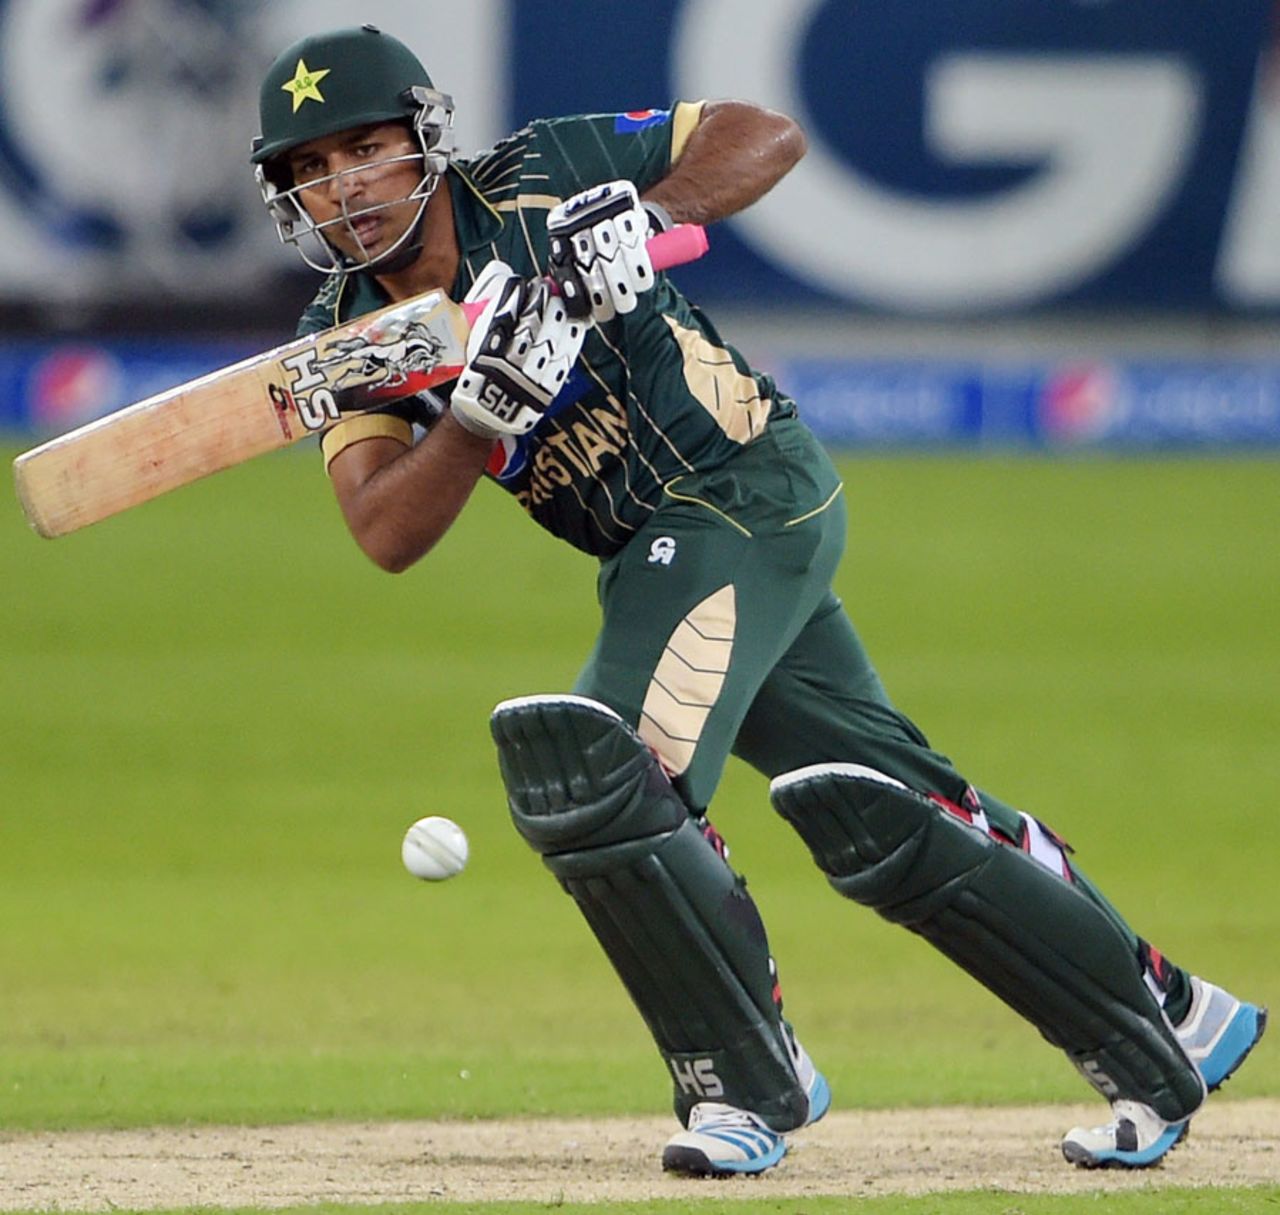 Sarfraz Ahmed grabbed his chance as opener by making 76, Pakistan v New Zealand, 1st T20, Dubai, December 4, 2014